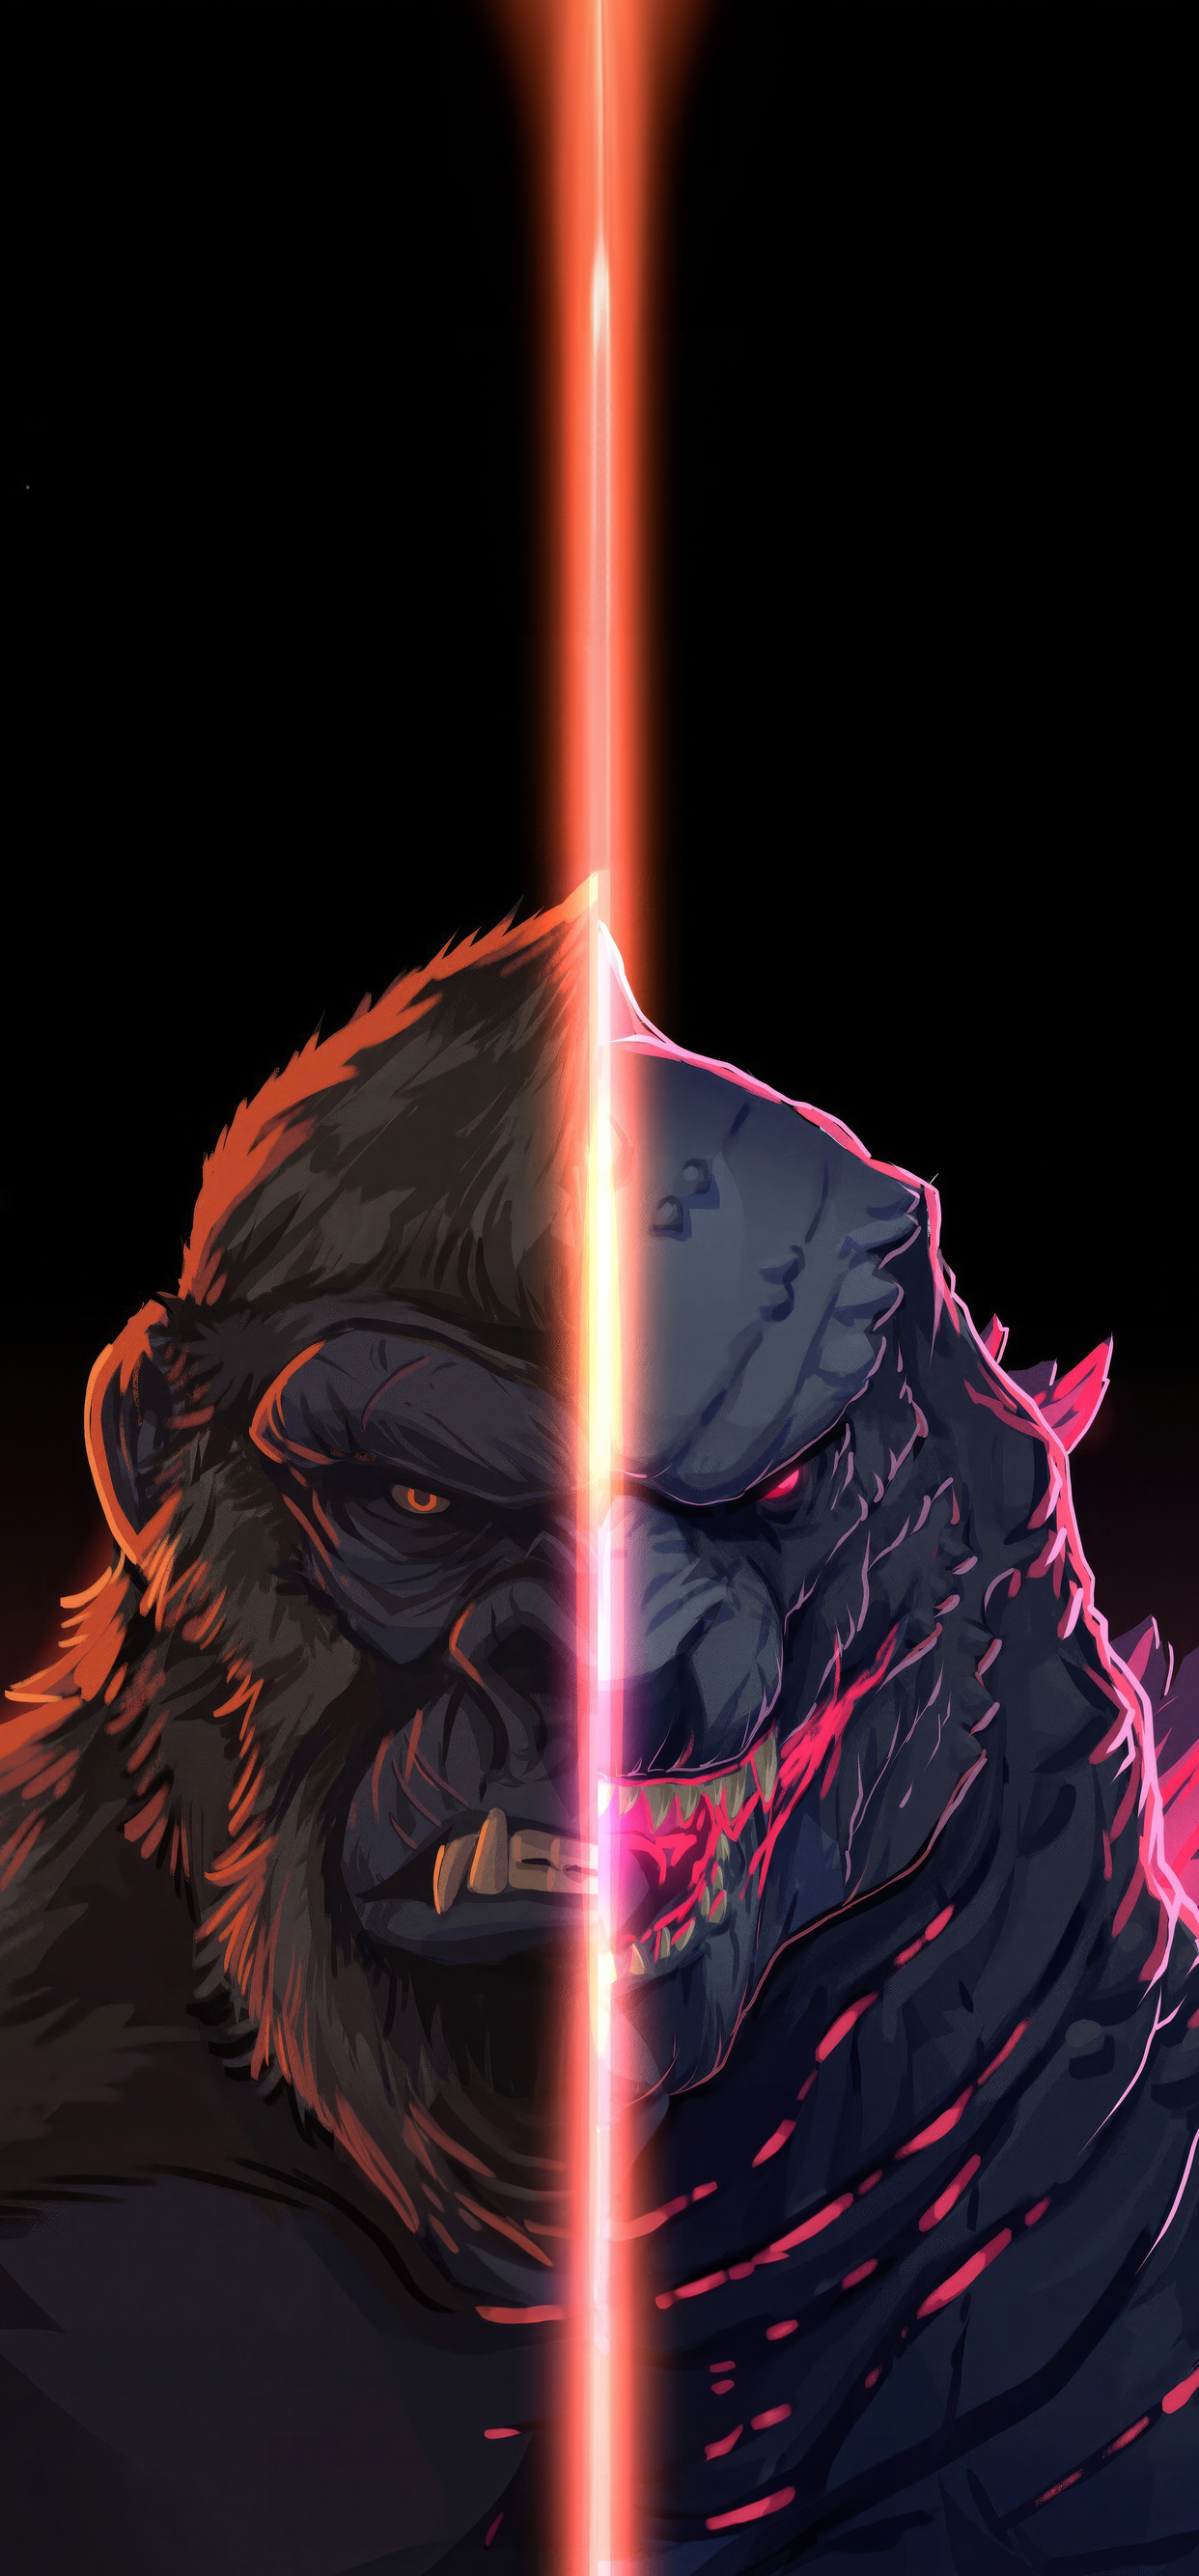 Godzilla x Kong: The New Empire wallpaper Resolution 1242x2668 | Best Download this awesome wallpaper - Cool Wallpaper HD - CoolWallpaper-HD.com